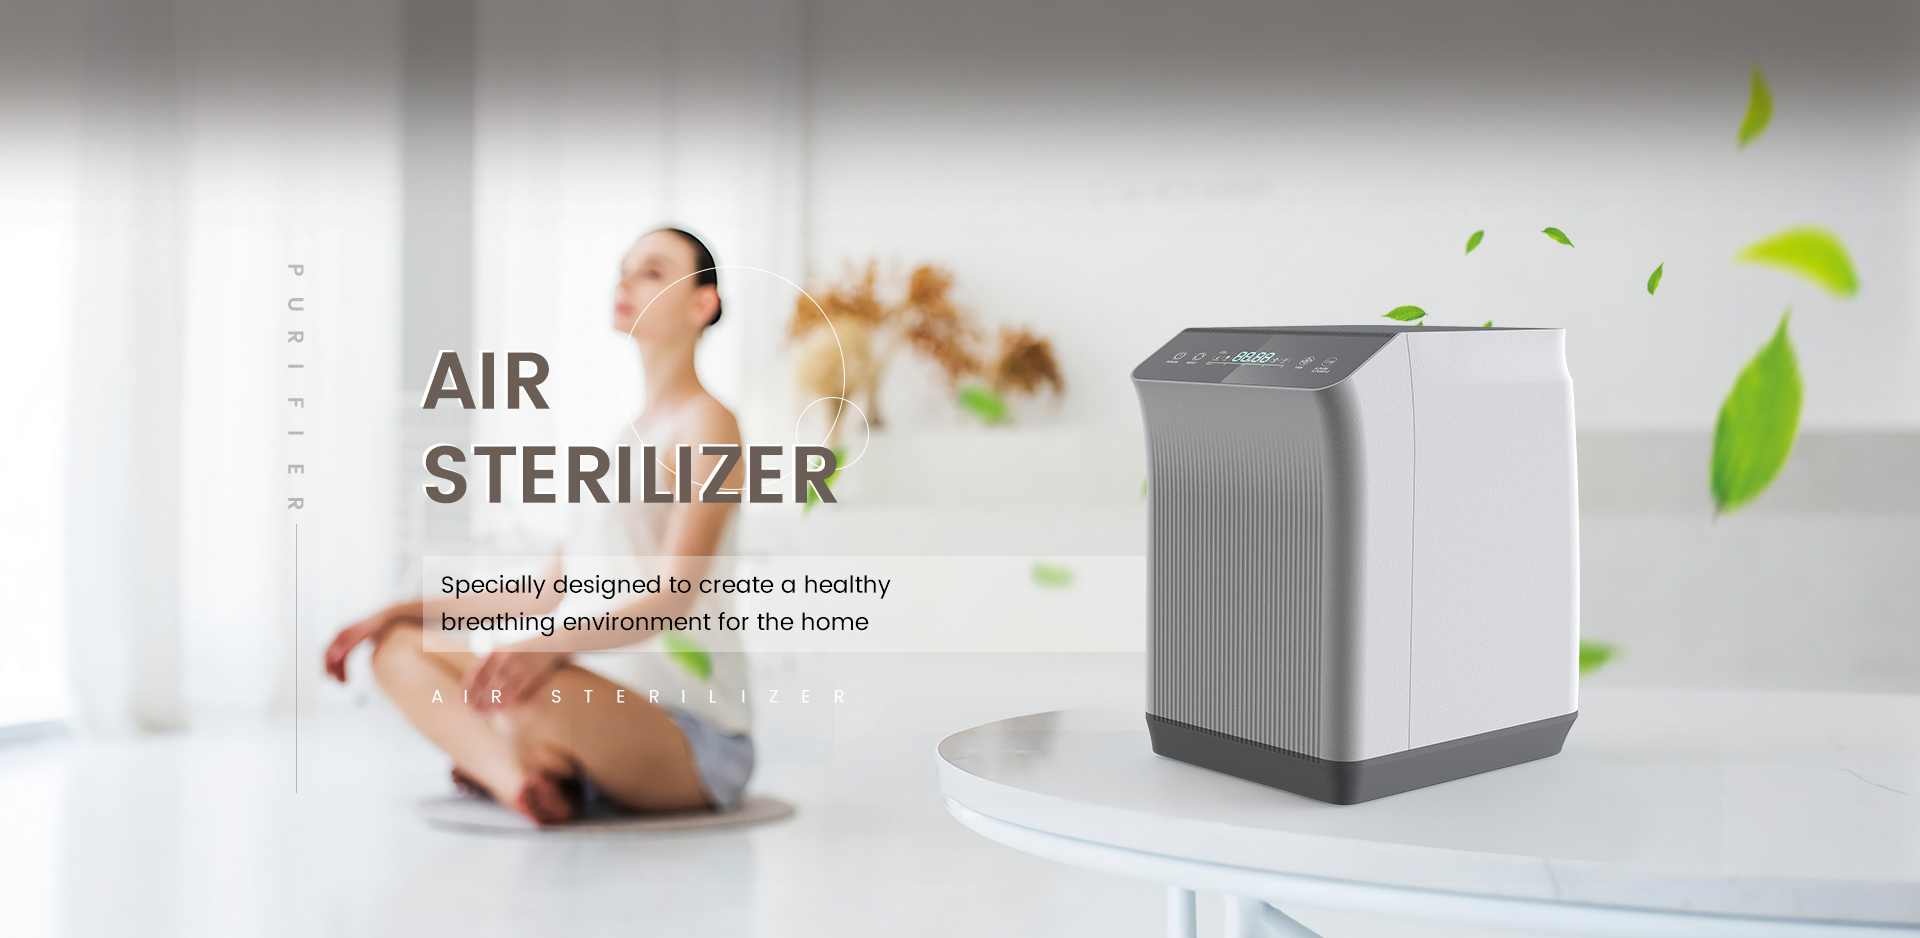 https://www.leeyoroto.com/f-air-purifier-specially-design-to-create-a-healthy-breathing-environment-for-the-home-product/